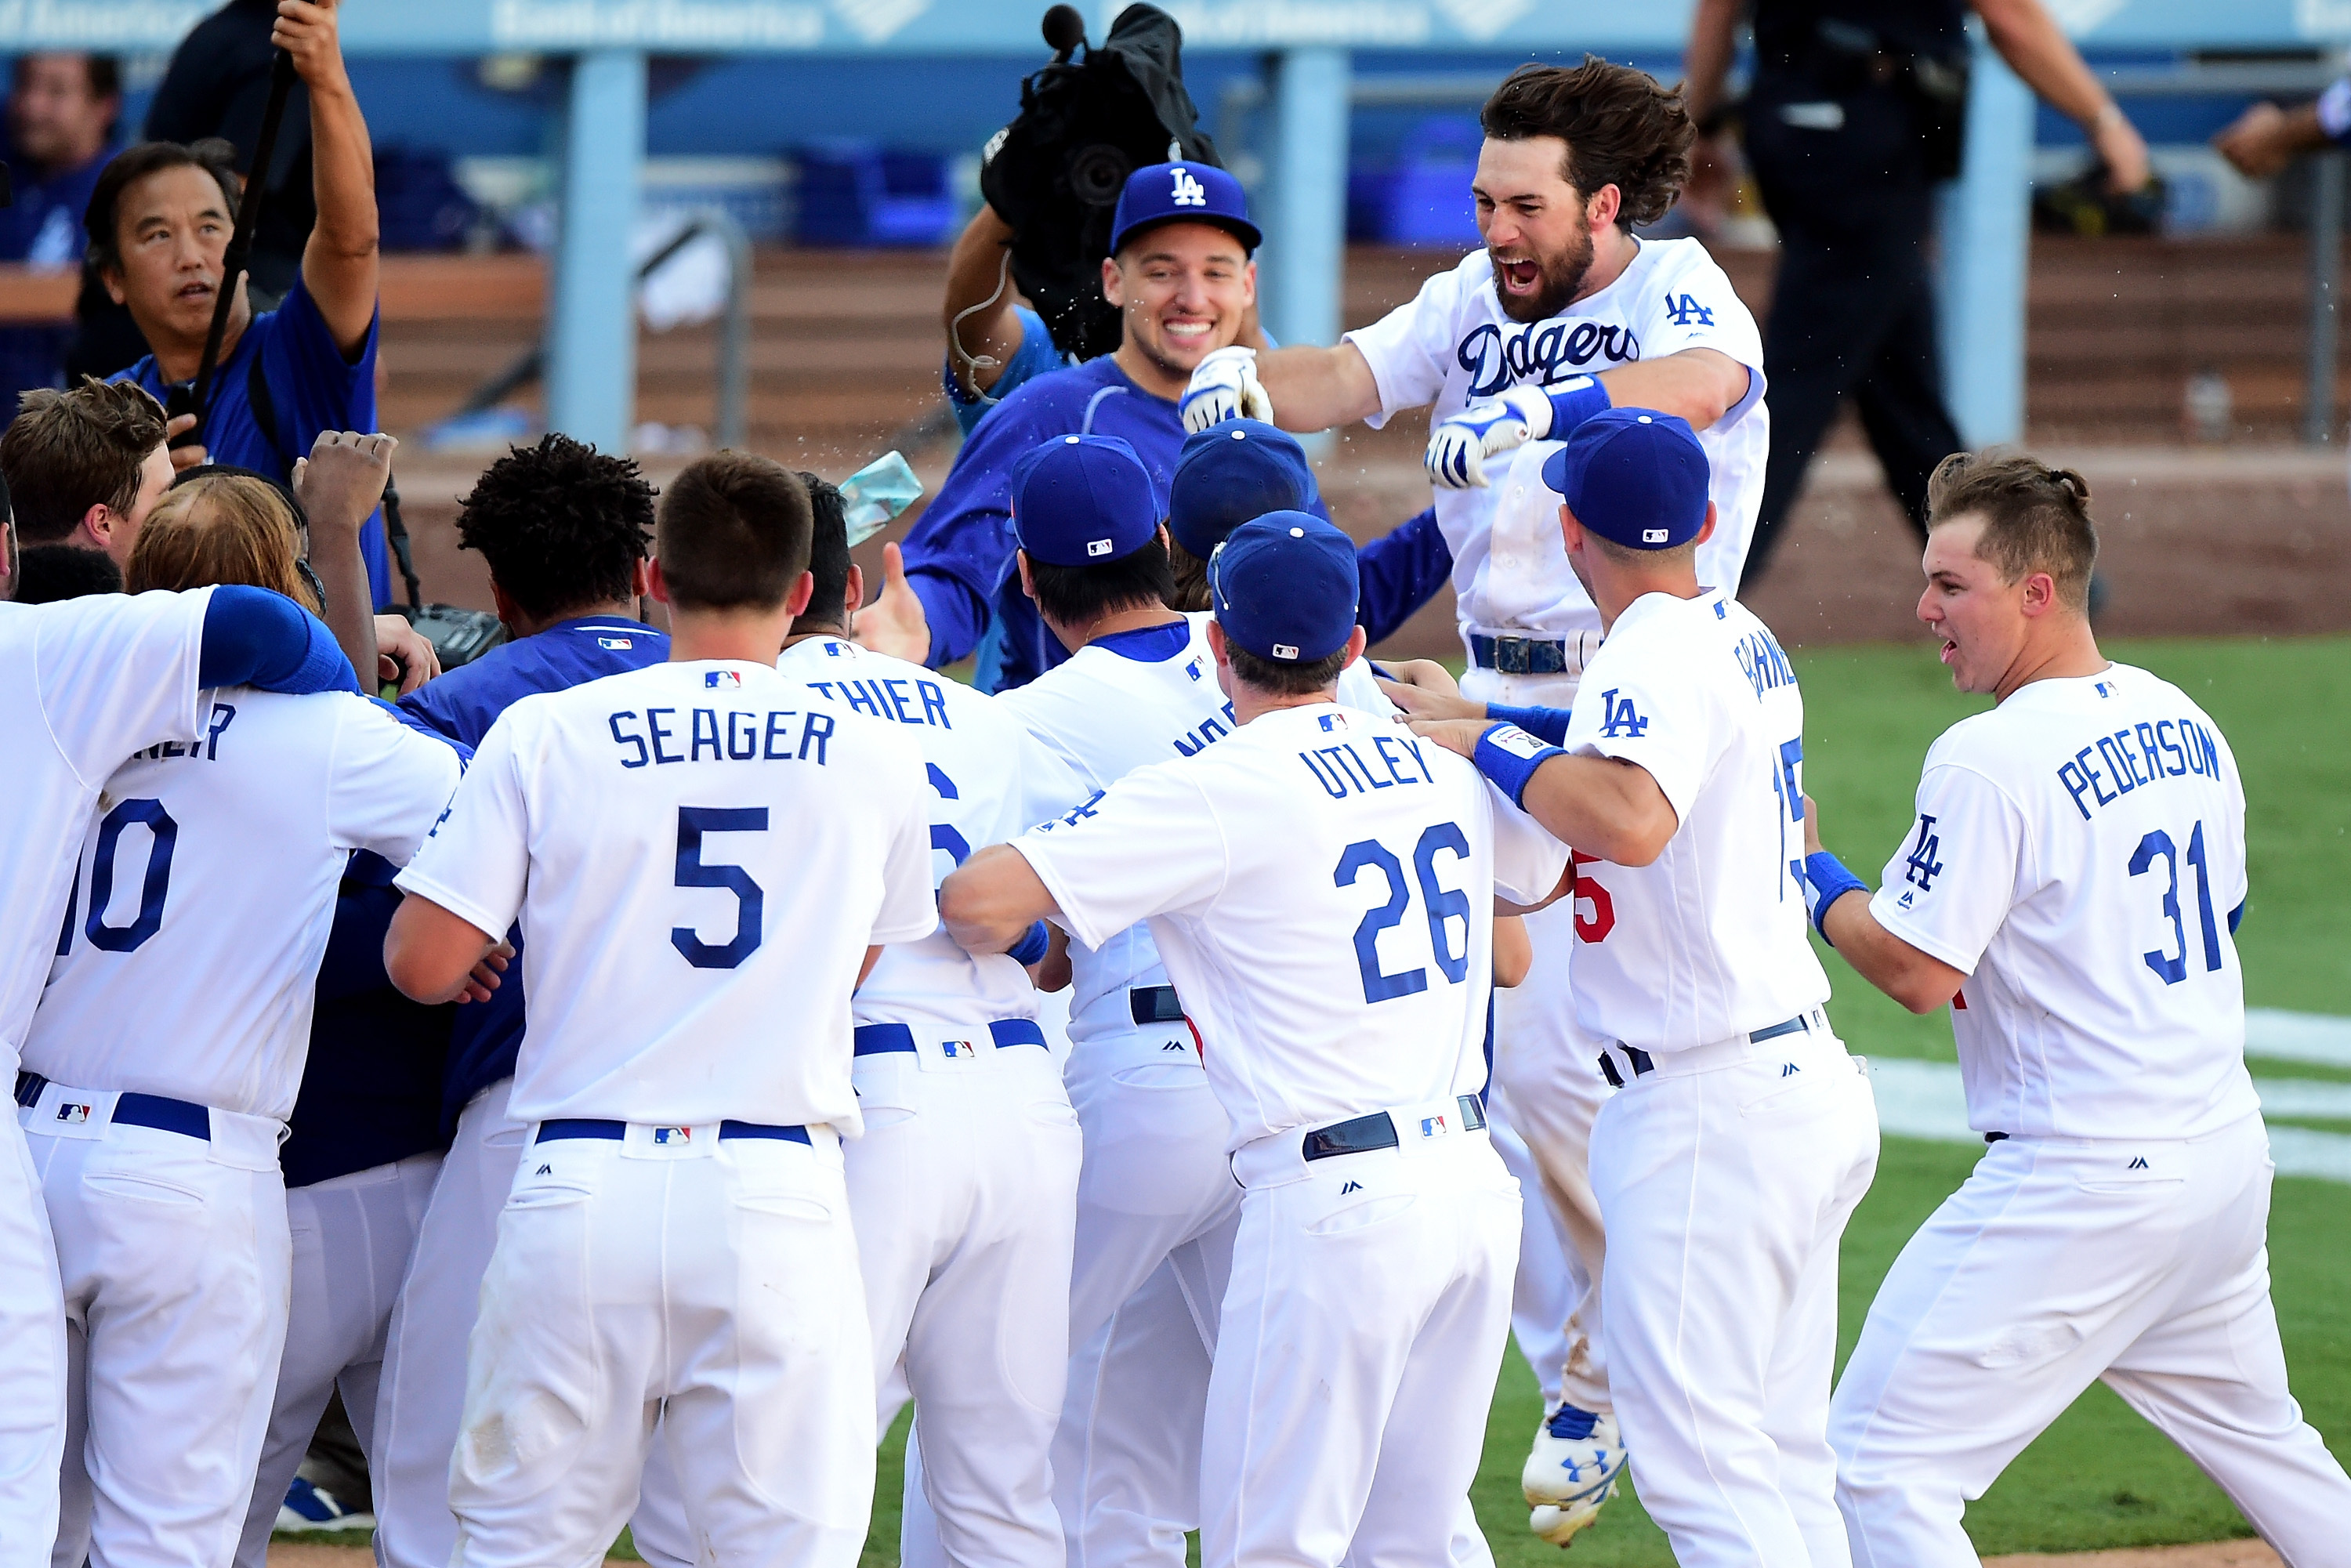 Dodgers National League West Champions, NL WEST CHAMPS. The #Dodgers win  their eighth consecutive NL West title!, By Los Angeles Dodgers